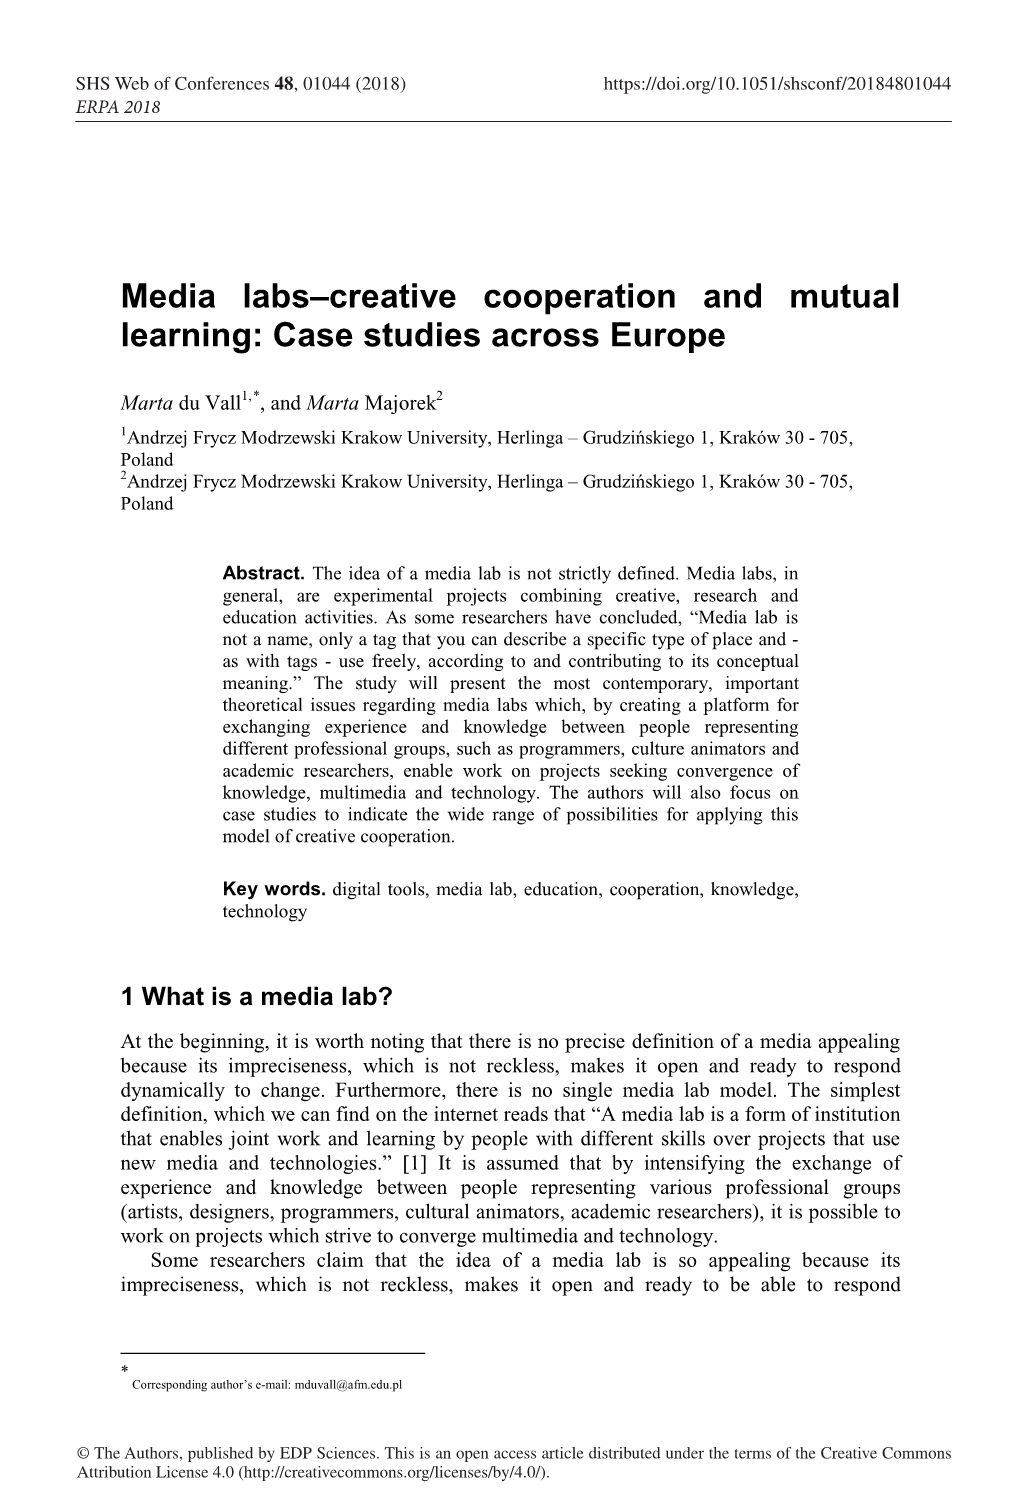 Media Labs–Creative Cooperation and Mutual Learning: Case Studies Across Europe